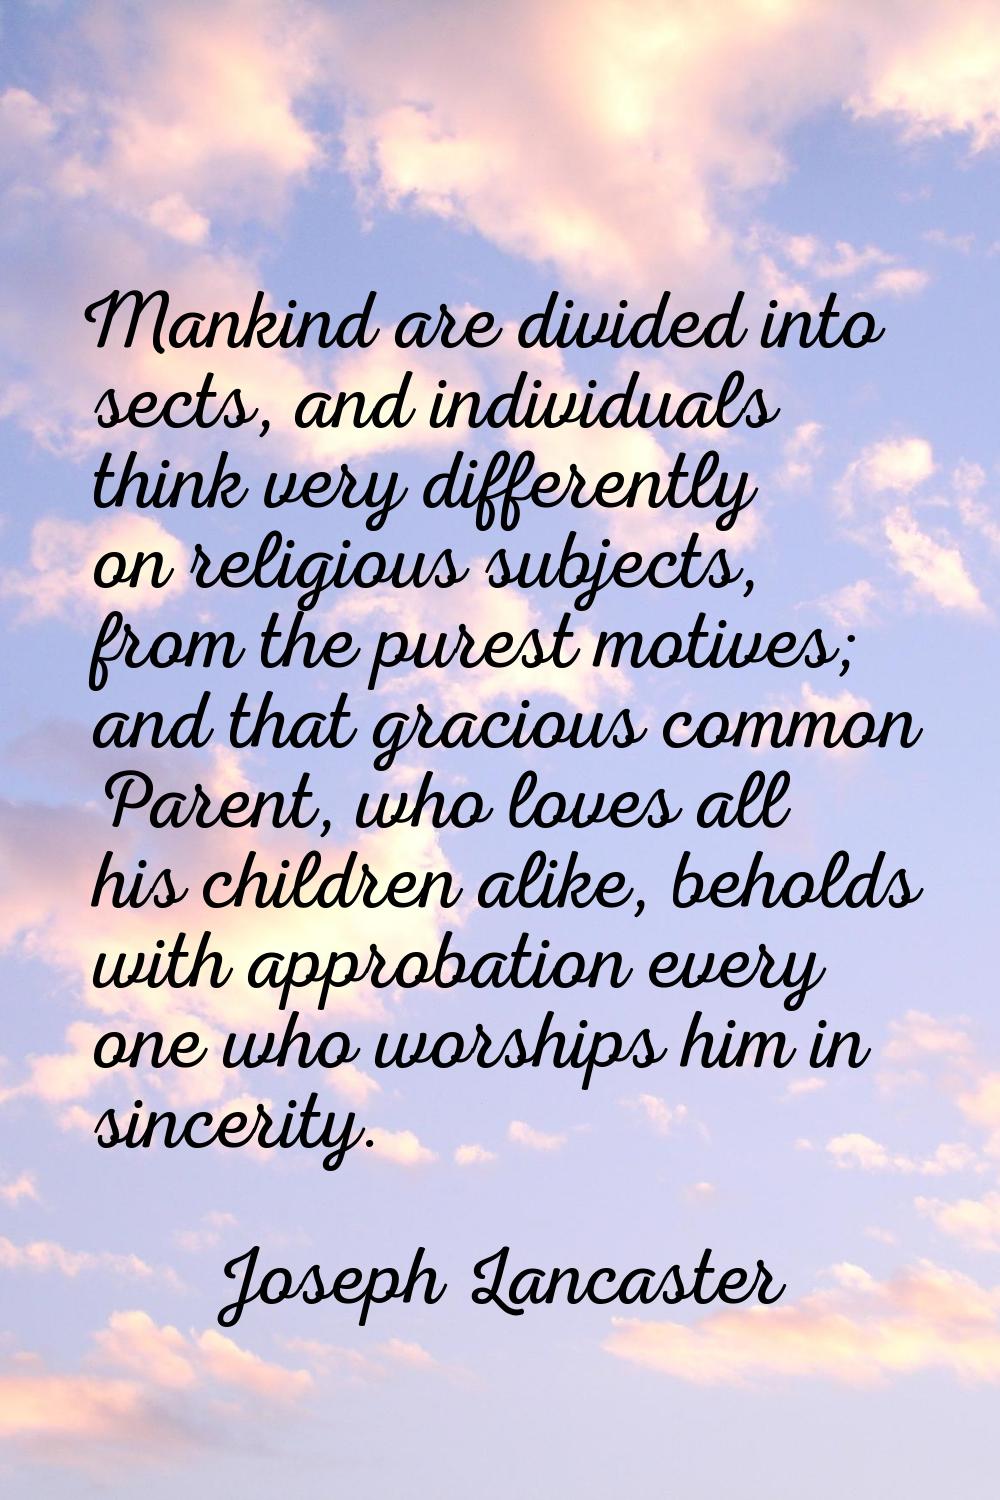 Mankind are divided into sects, and individuals think very differently on religious subjects, from 